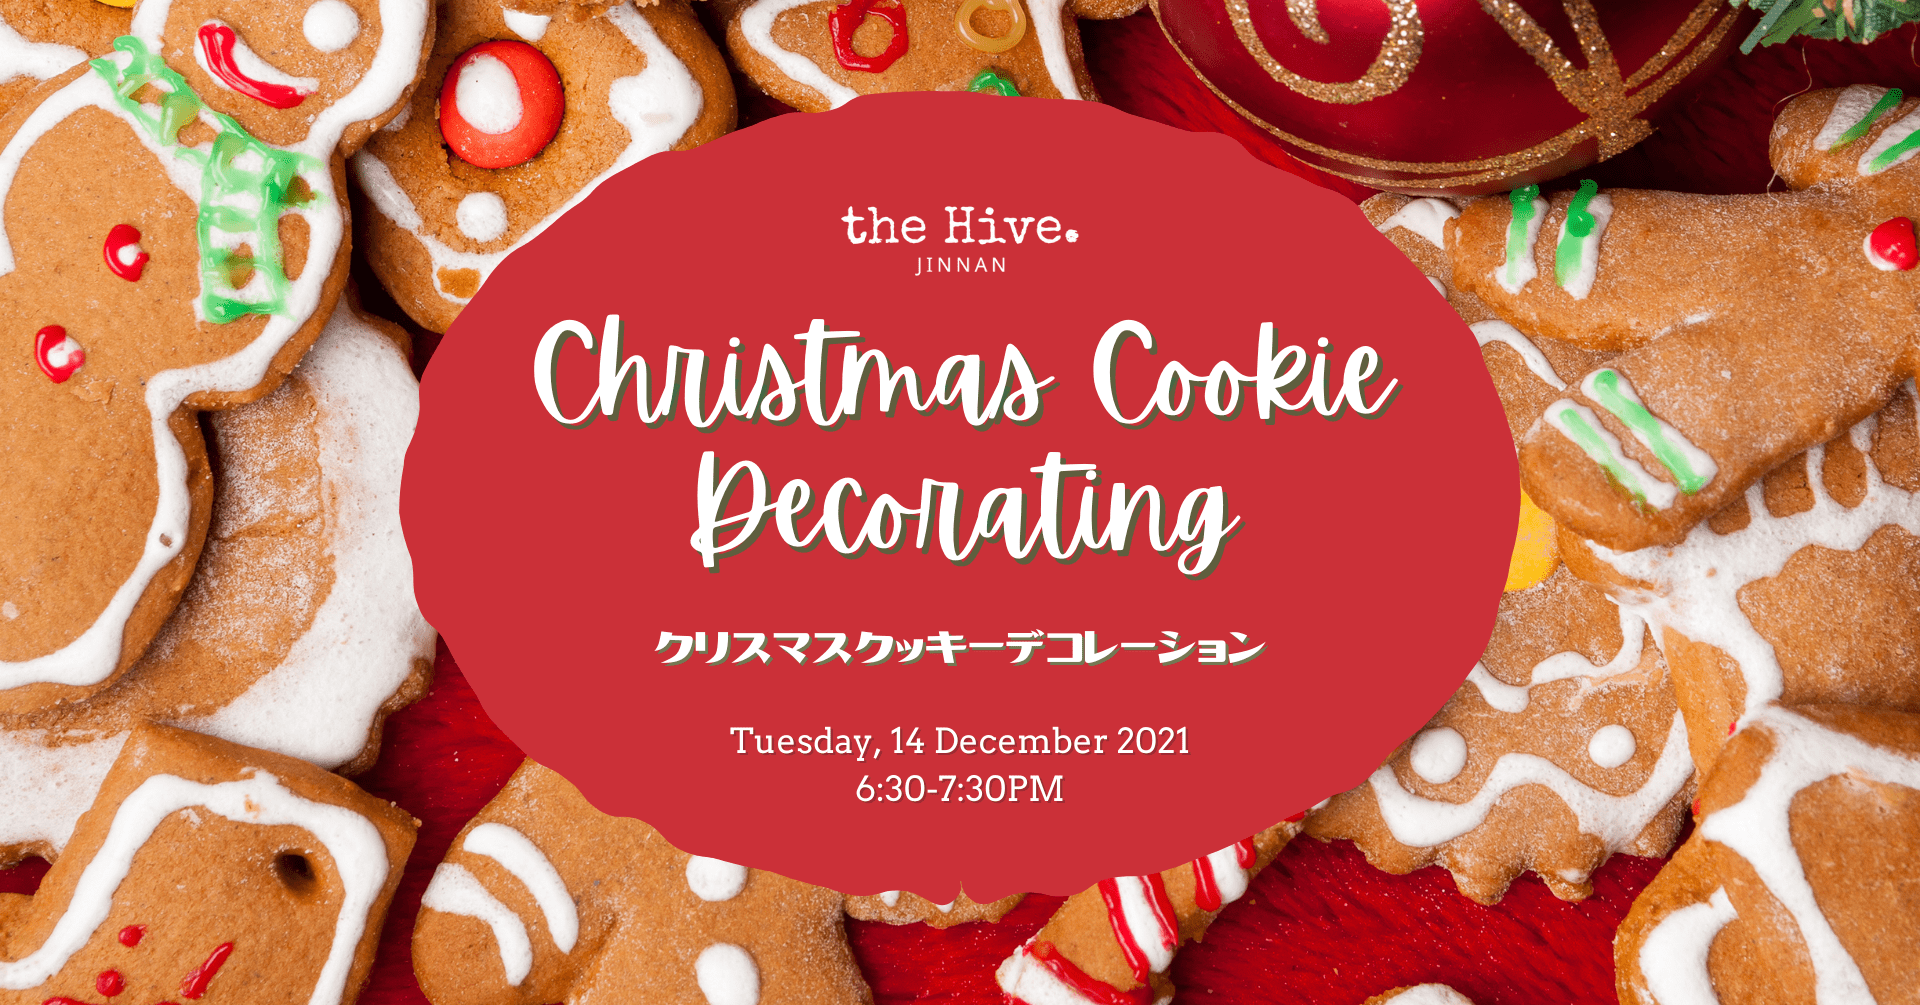 the hive christmas cookie event